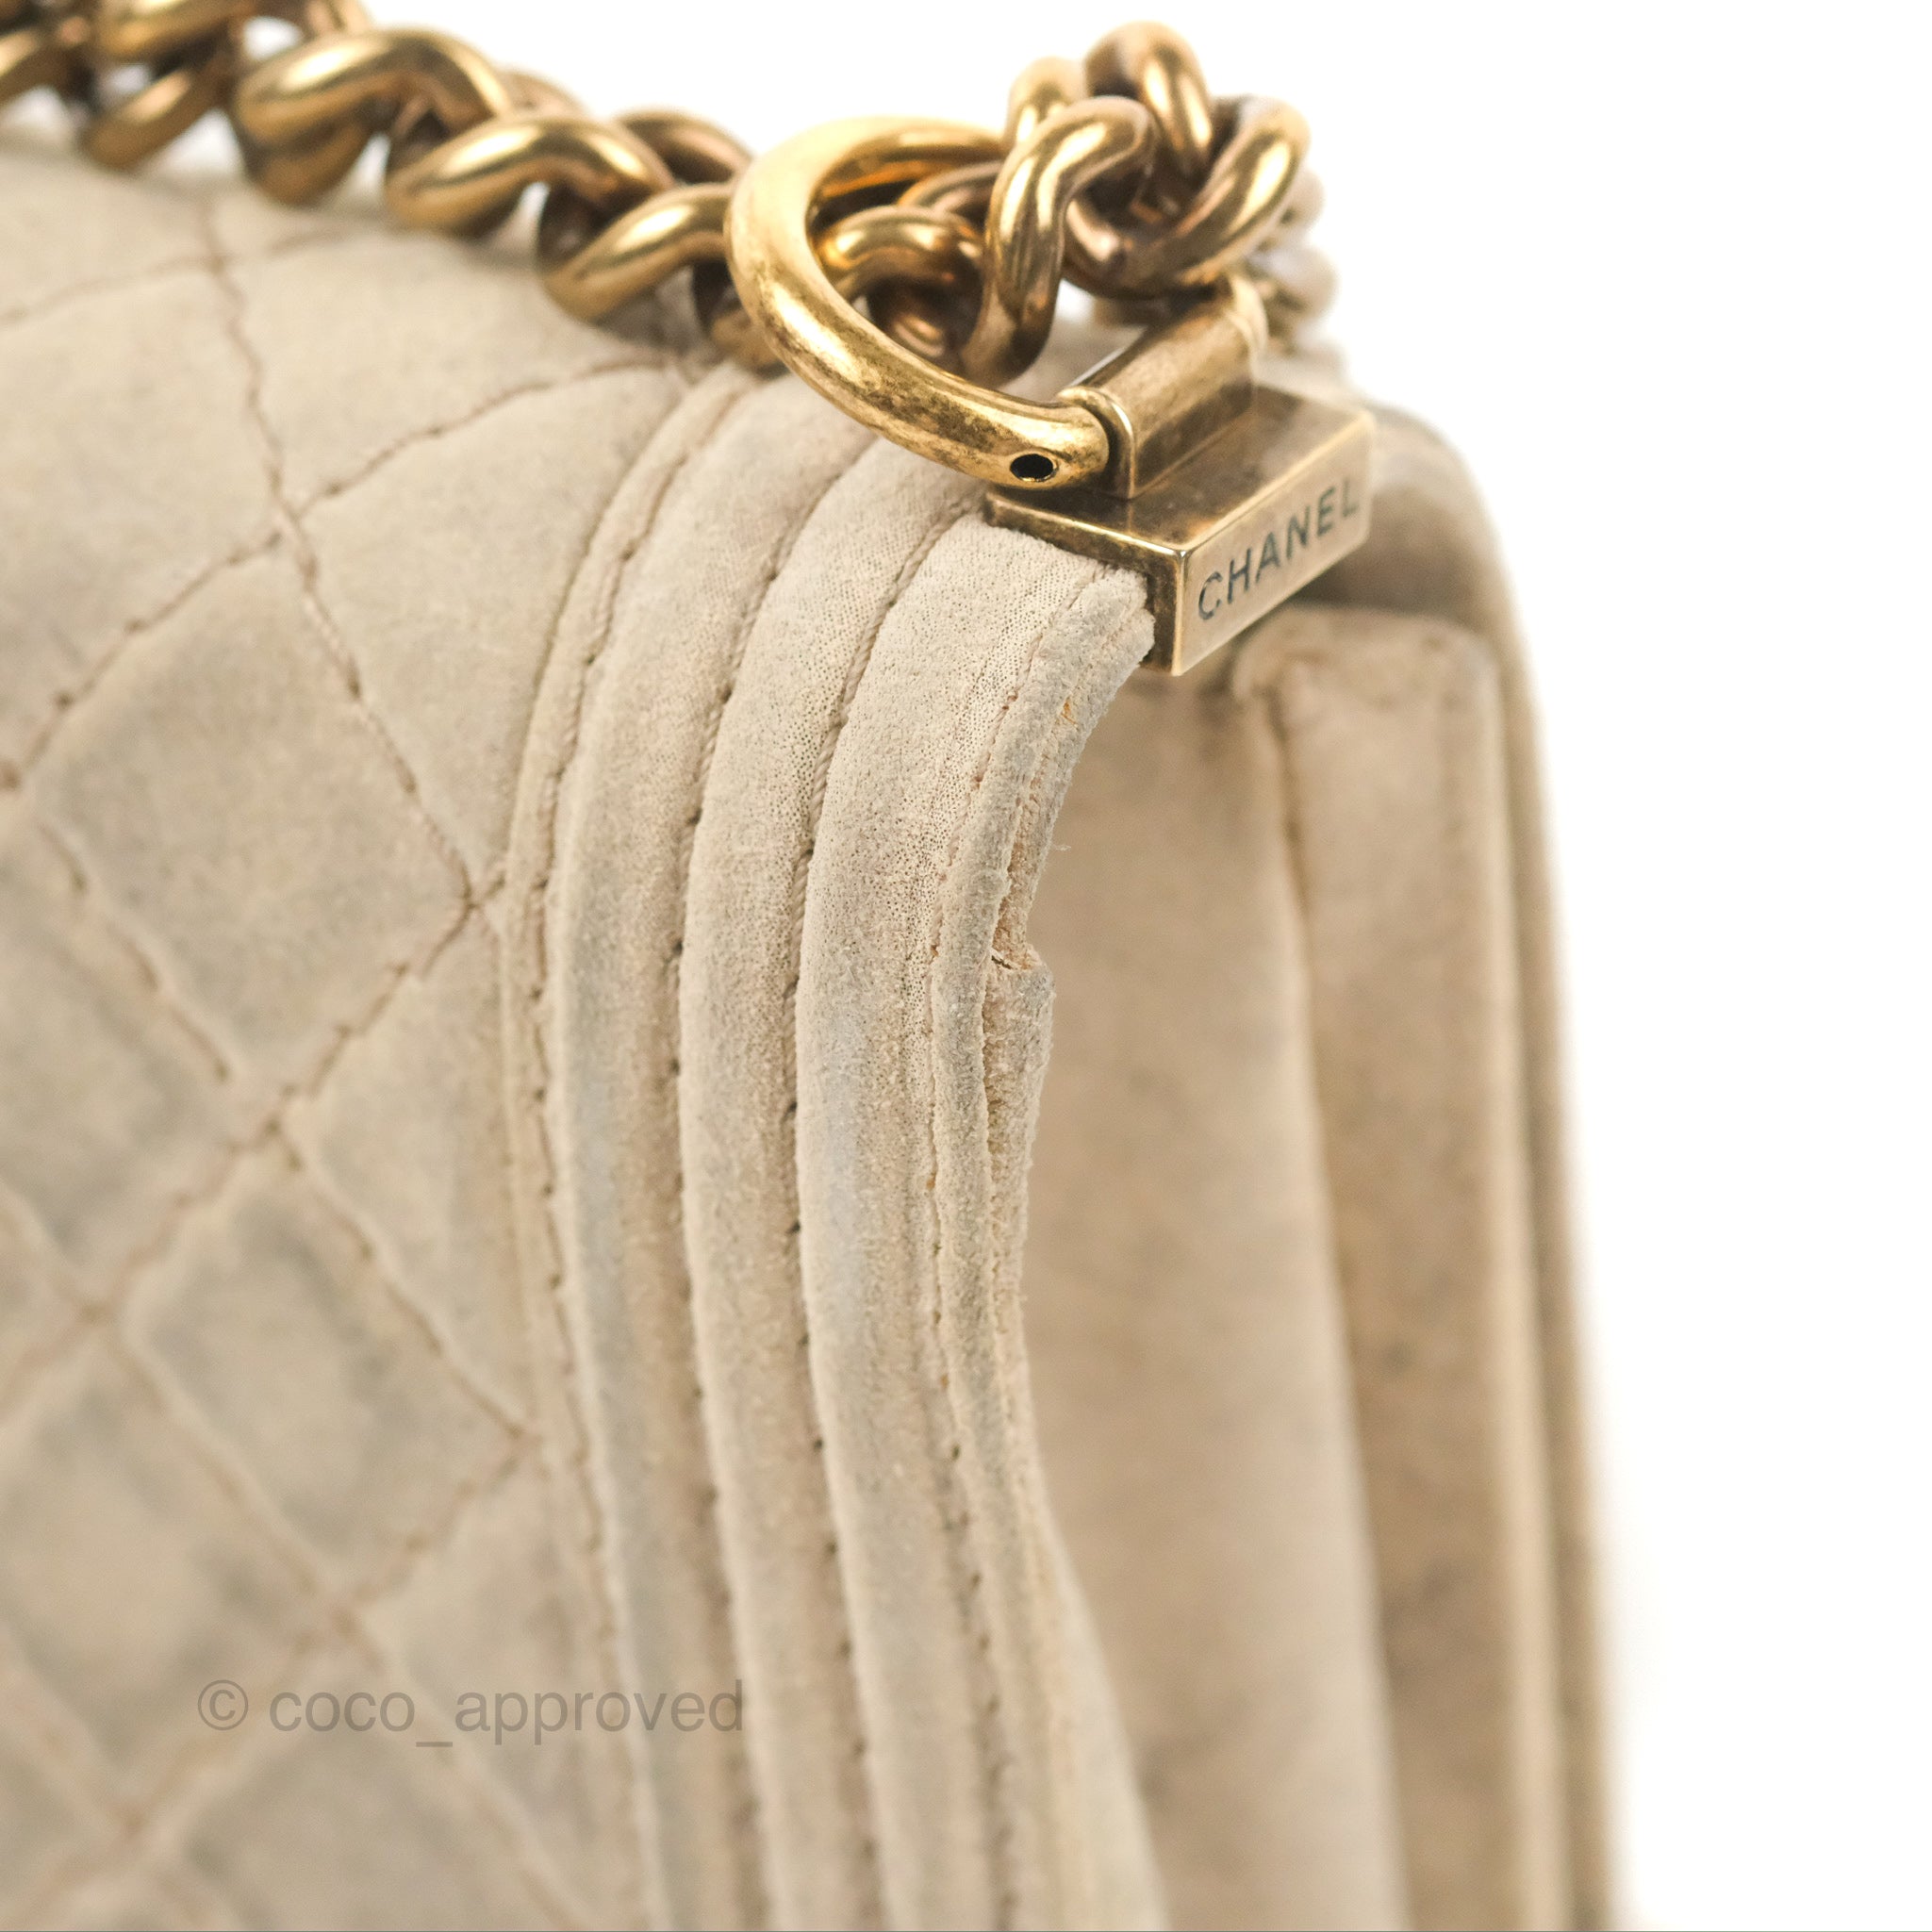 Chanel Boy Flap Bag Quilted Distressed Suede Large – Coco Approved Studio